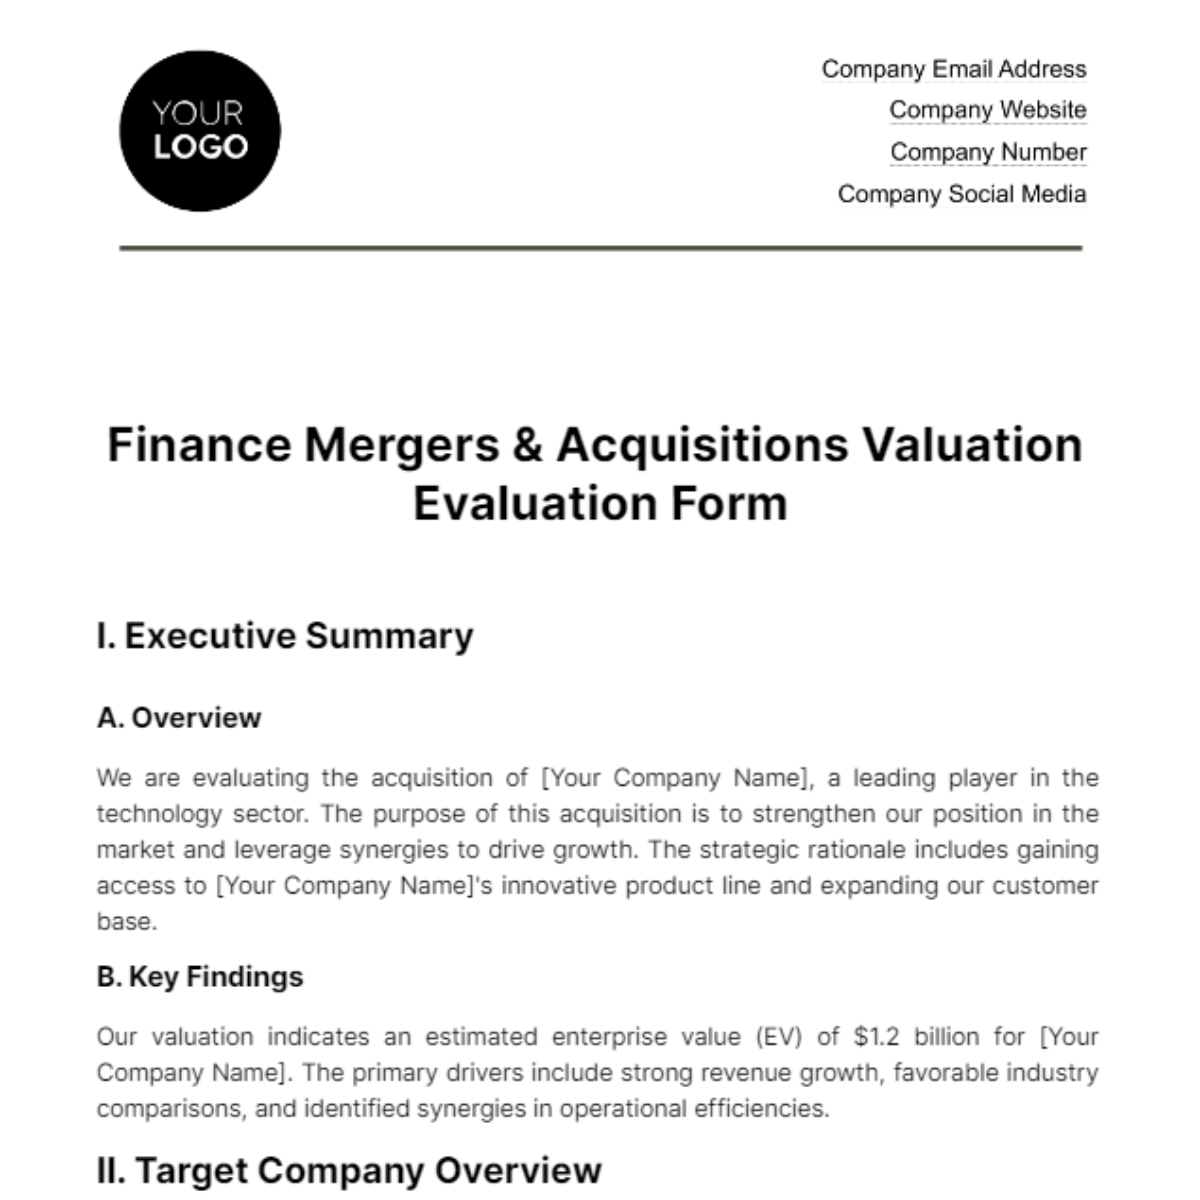 Free Finance Mergers & Acquisitions Valuation Evaluation Form Template